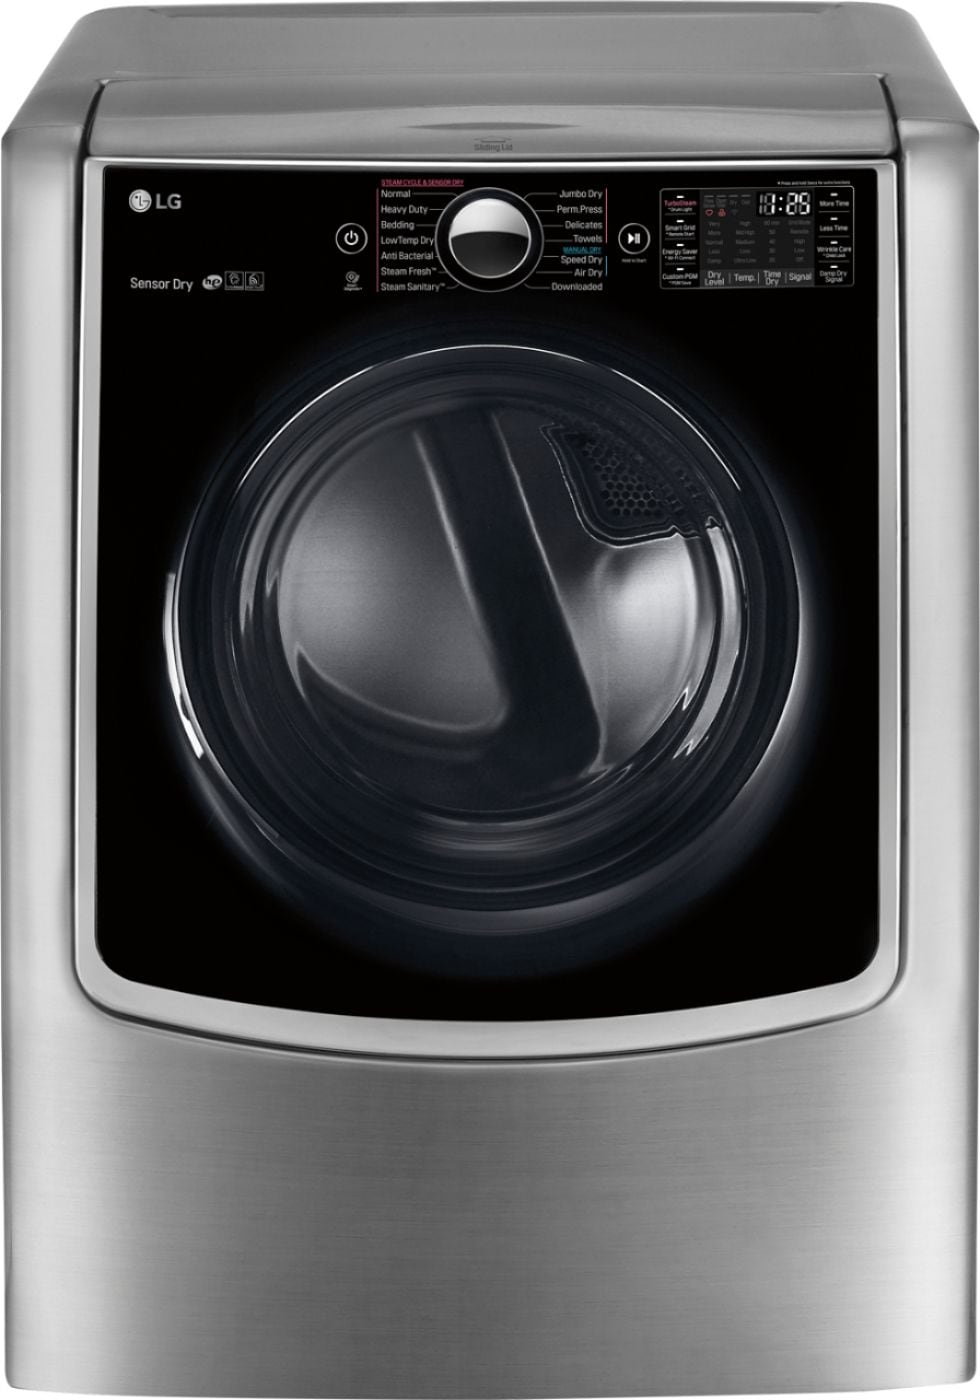 LG - 9.0 Cu. Ft. Smart Electric Dryer with Steam and Sensor Dry - Graphite steel_1